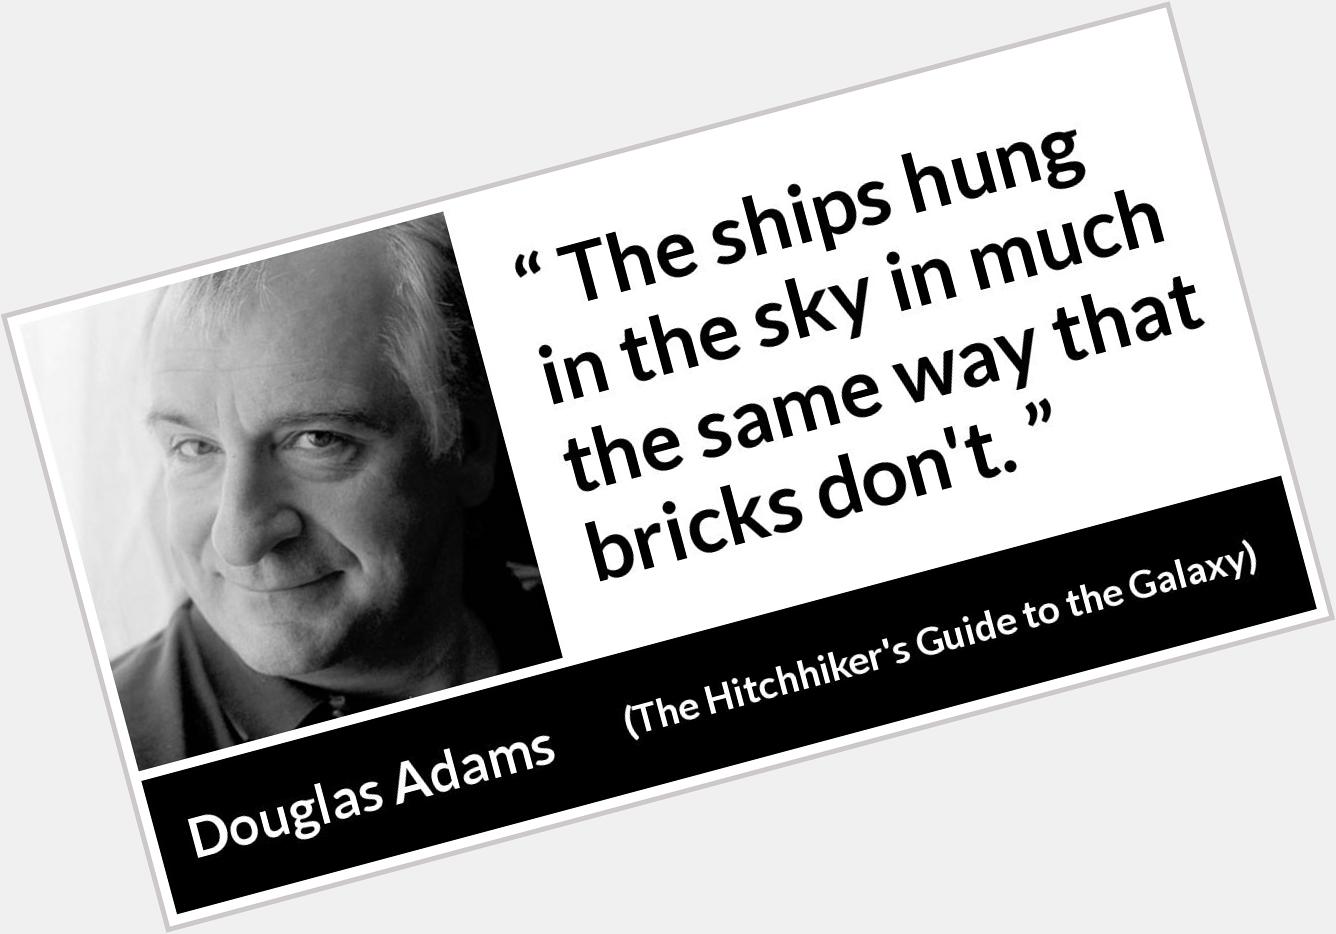 Happy birthday to Douglas Adams. Even after all this time, I miss your whimsy. 